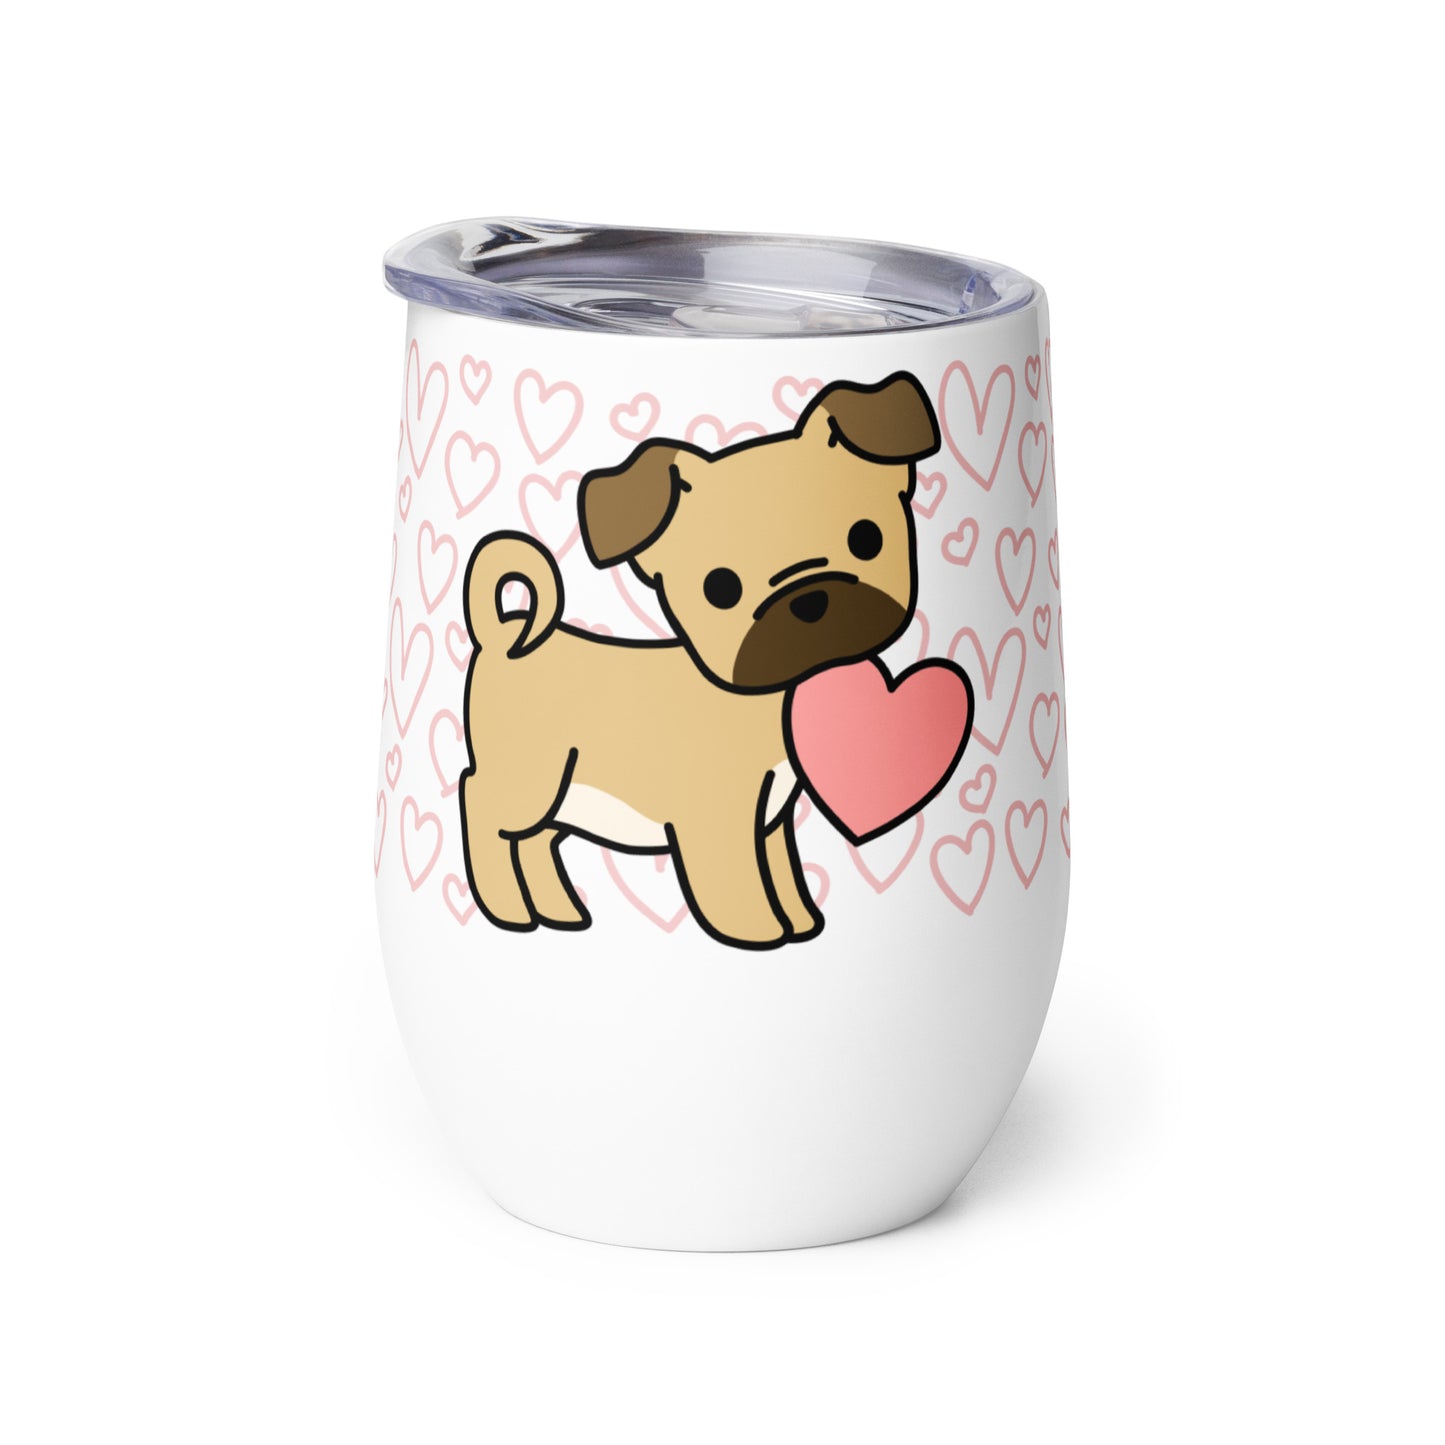 A white metal wine tumbler with a plastic lid. A pattern of hearts wraps around the top half of the tumbler. Centered on the tumbler is a cute, stylized illustration of a Puggle